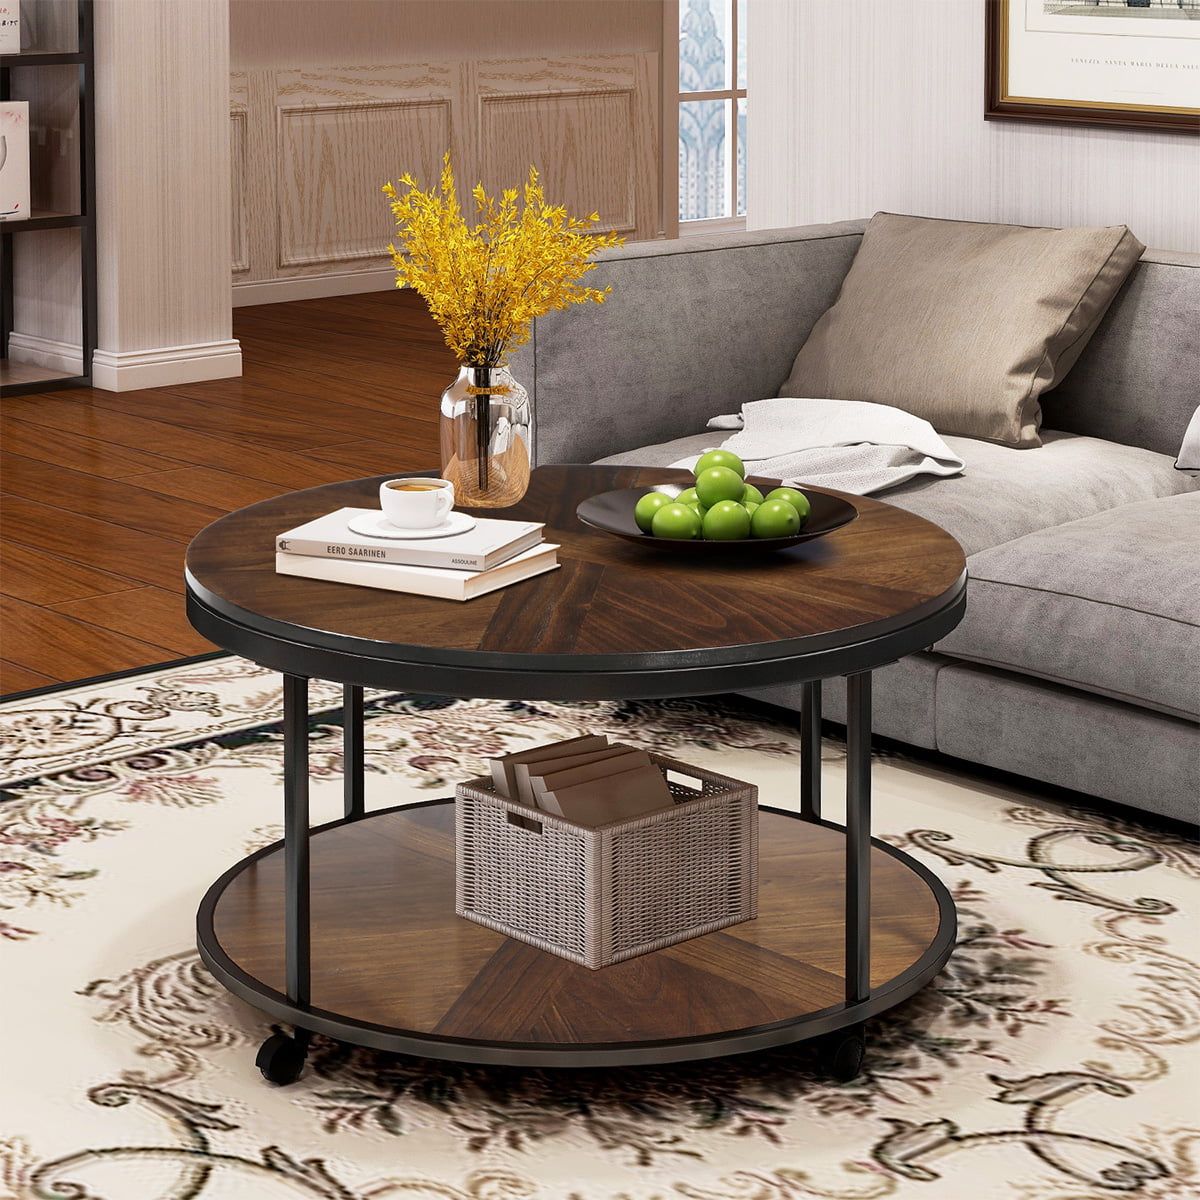 Sentern Round Coffee Table With Caster Wheels And Unique Textured Throughout Round Coffee Tables With Storage (Gallery 9 of 20)